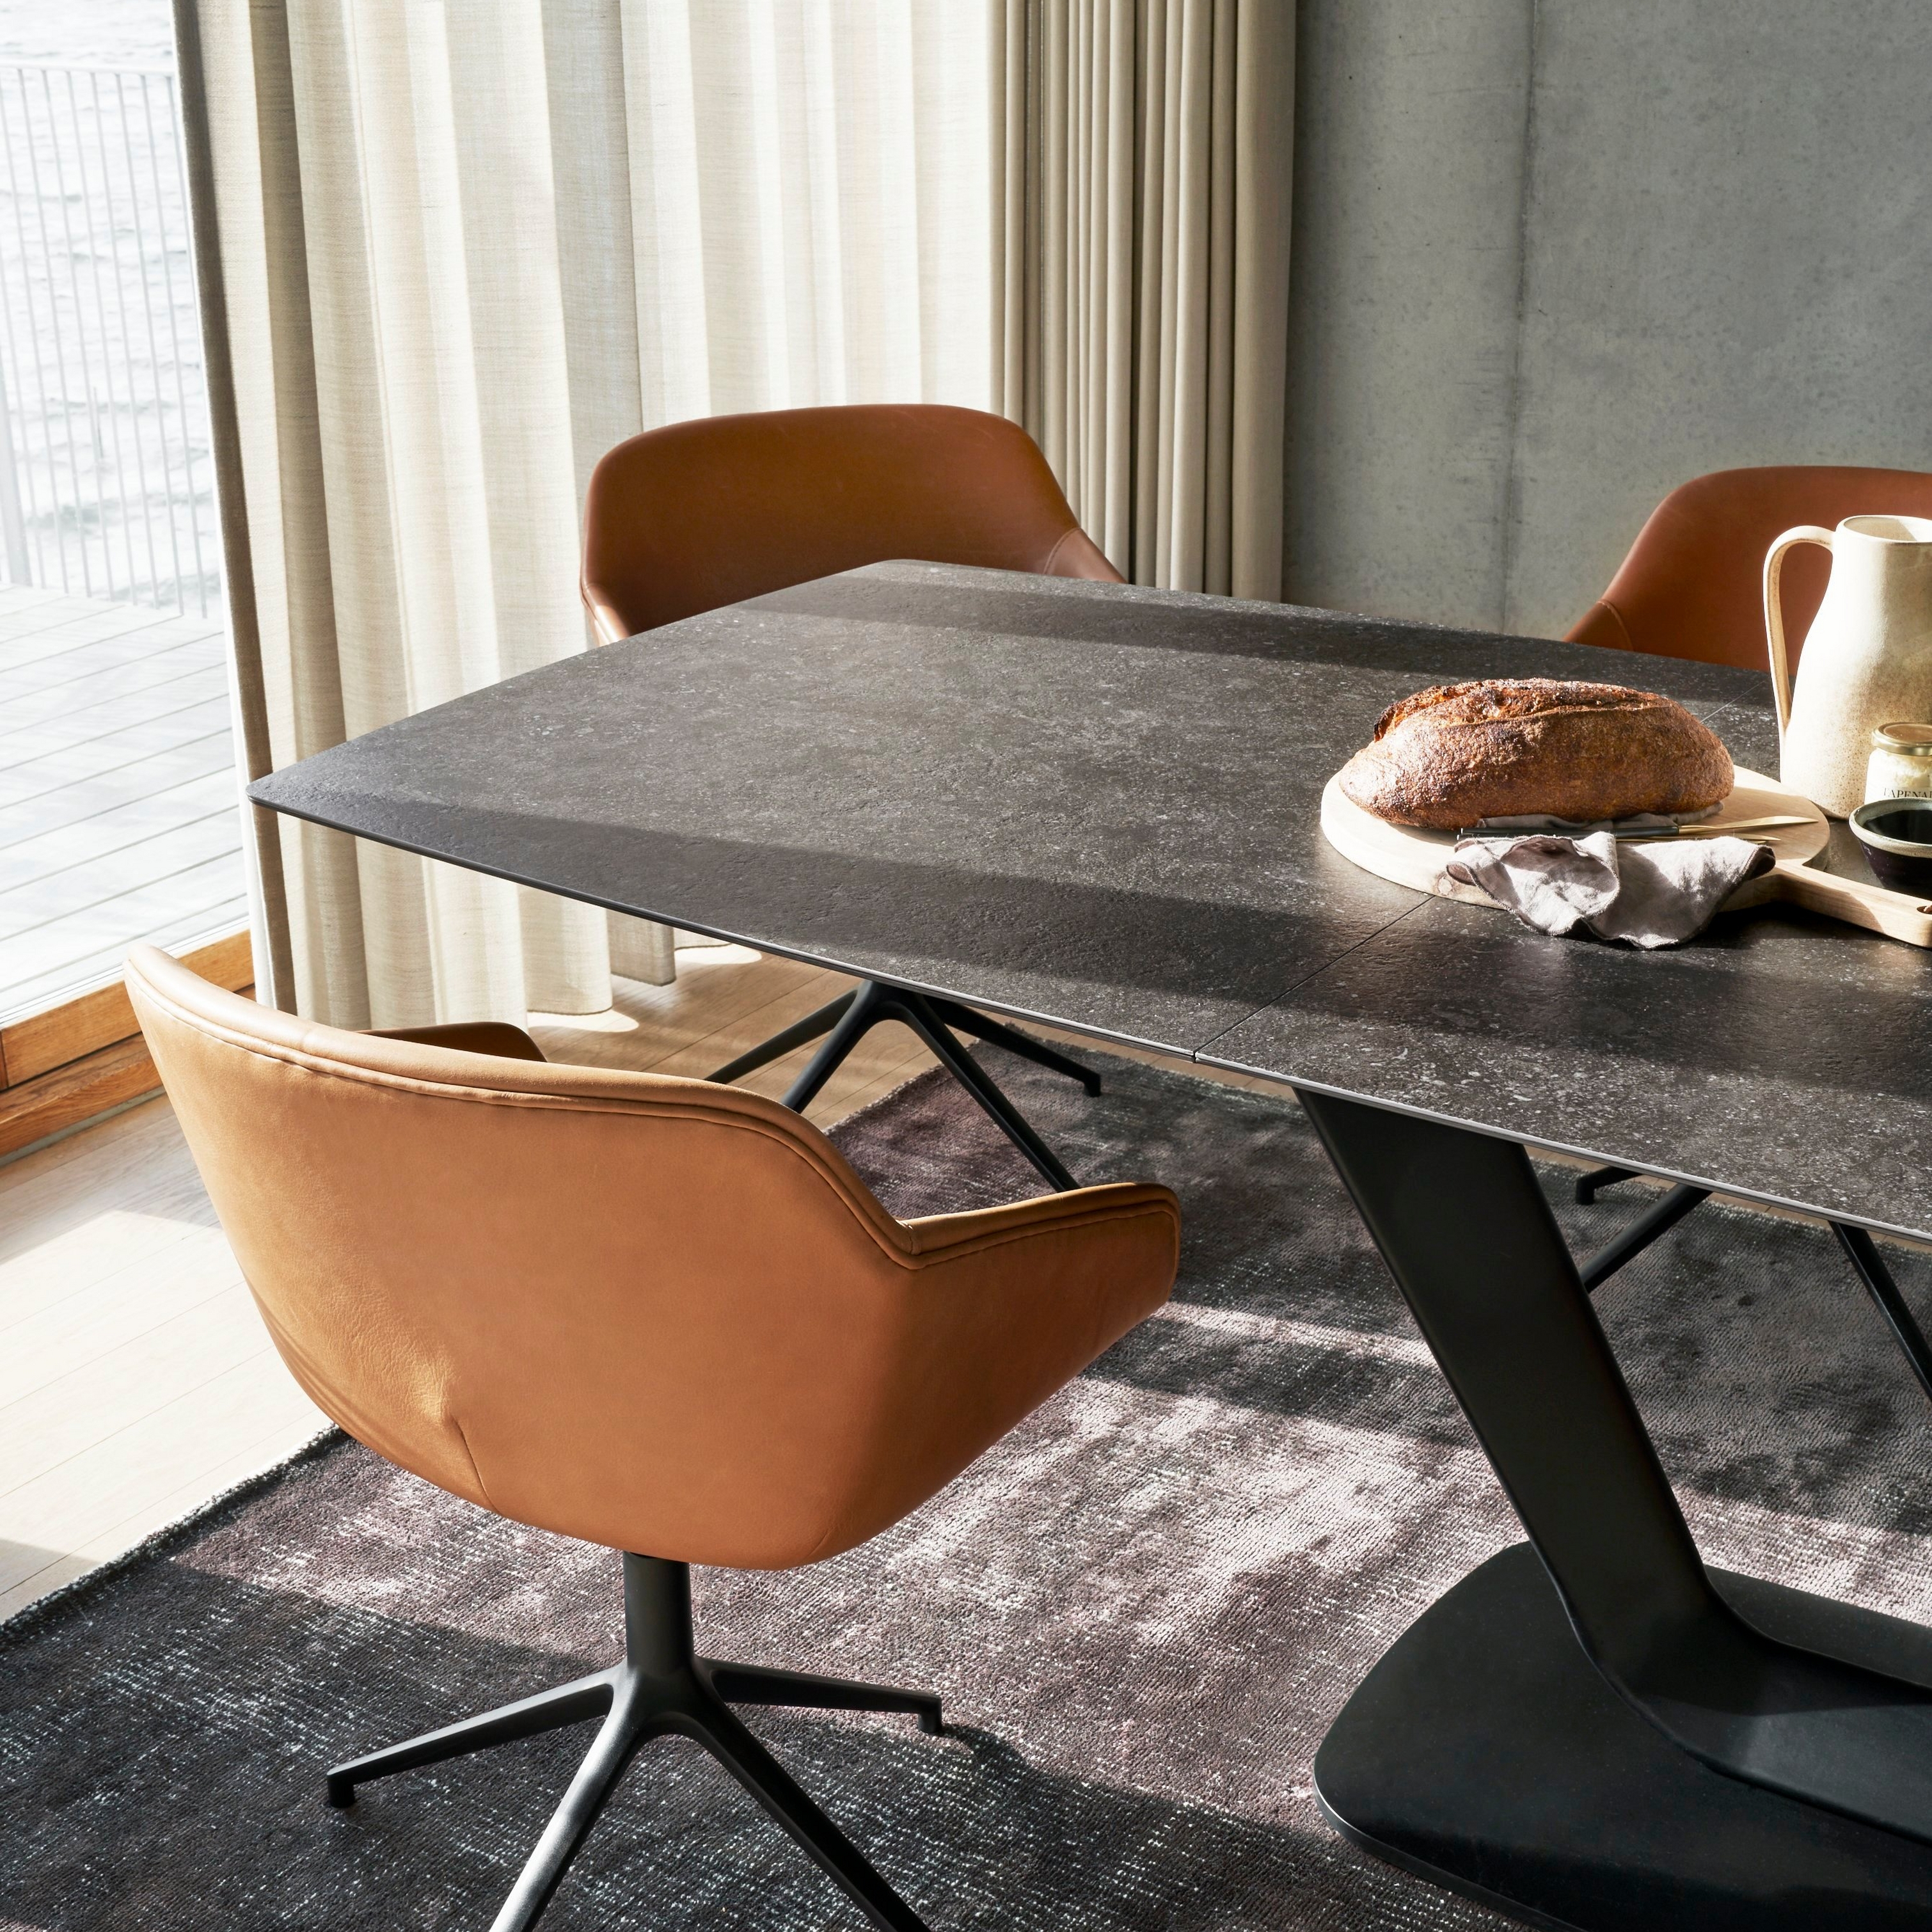 Alicante dining table with supplementary tabletop in dark gray stone ceramic